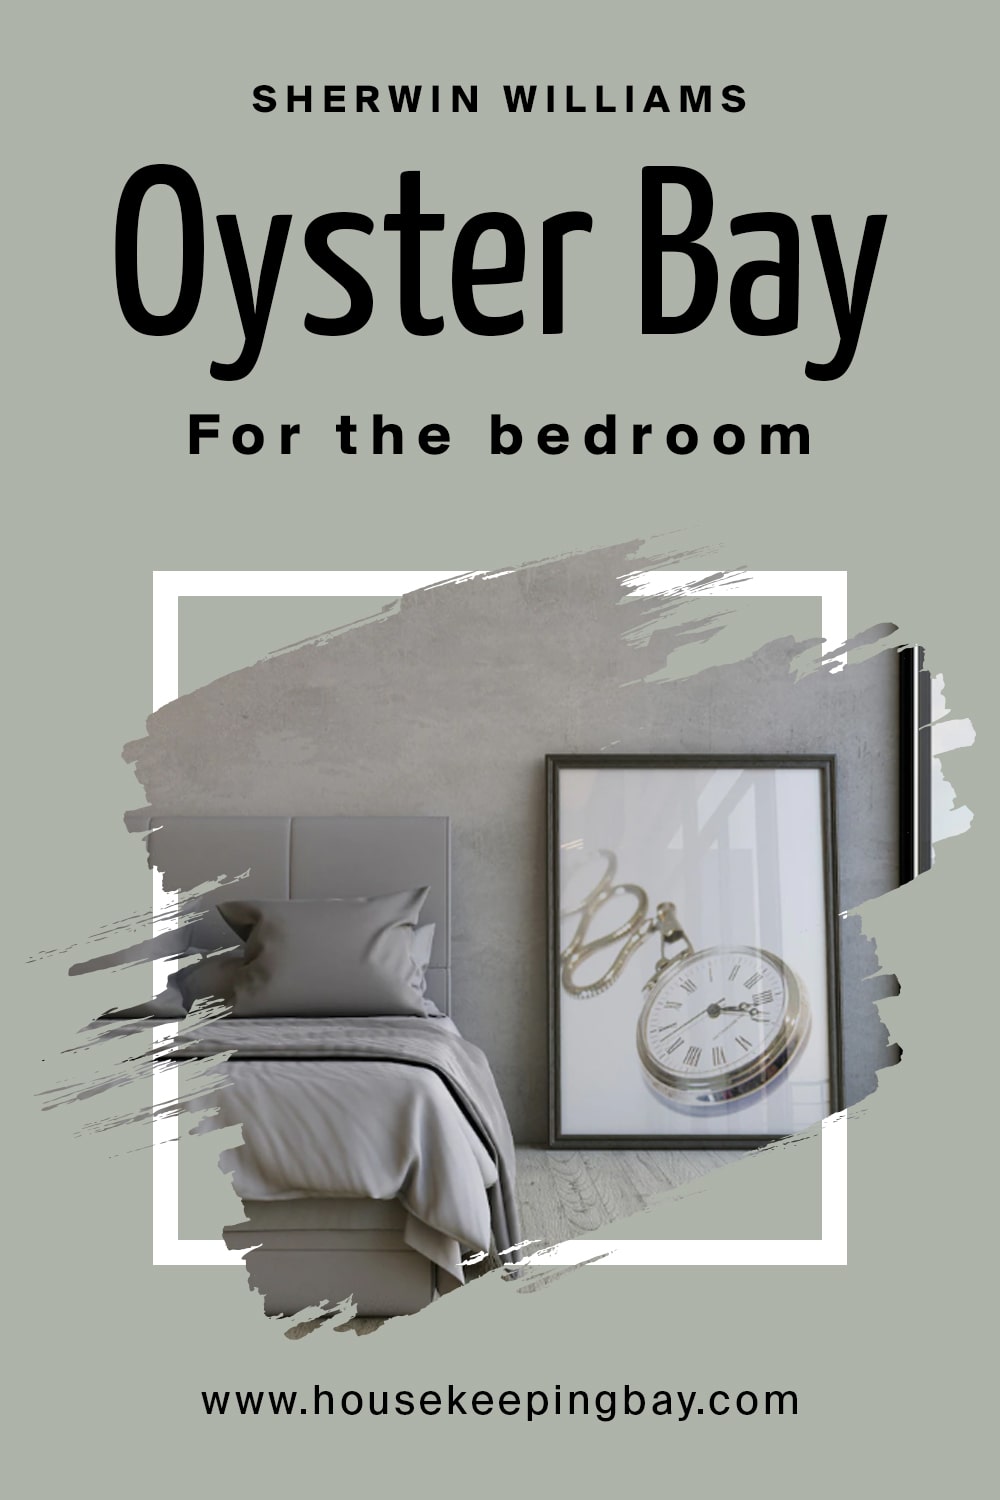 Sherwin Williams. Oyster Bay For the bedroom